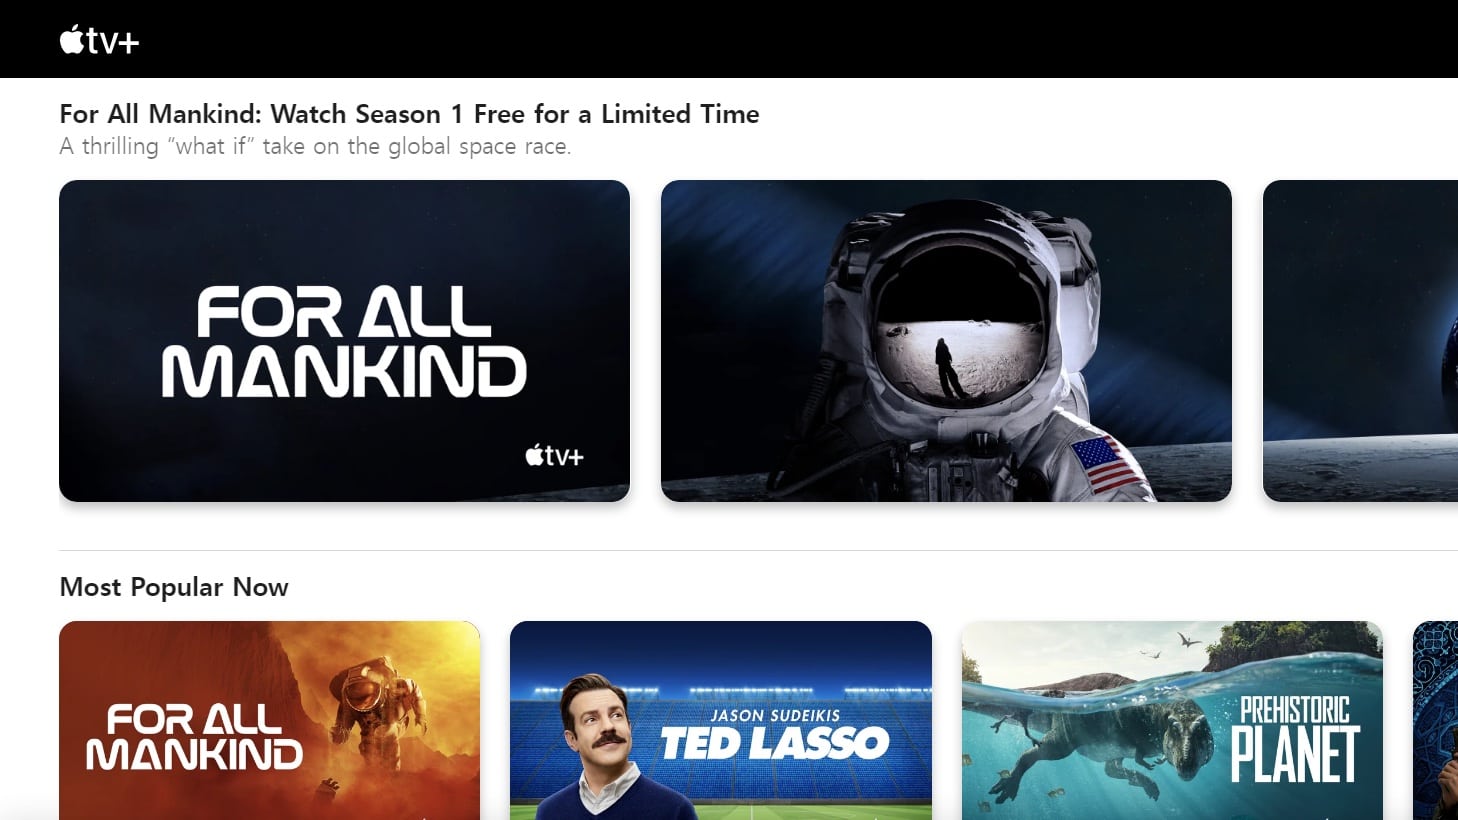 'For All Mankind' season 1 is now free to watch on Apple TV+